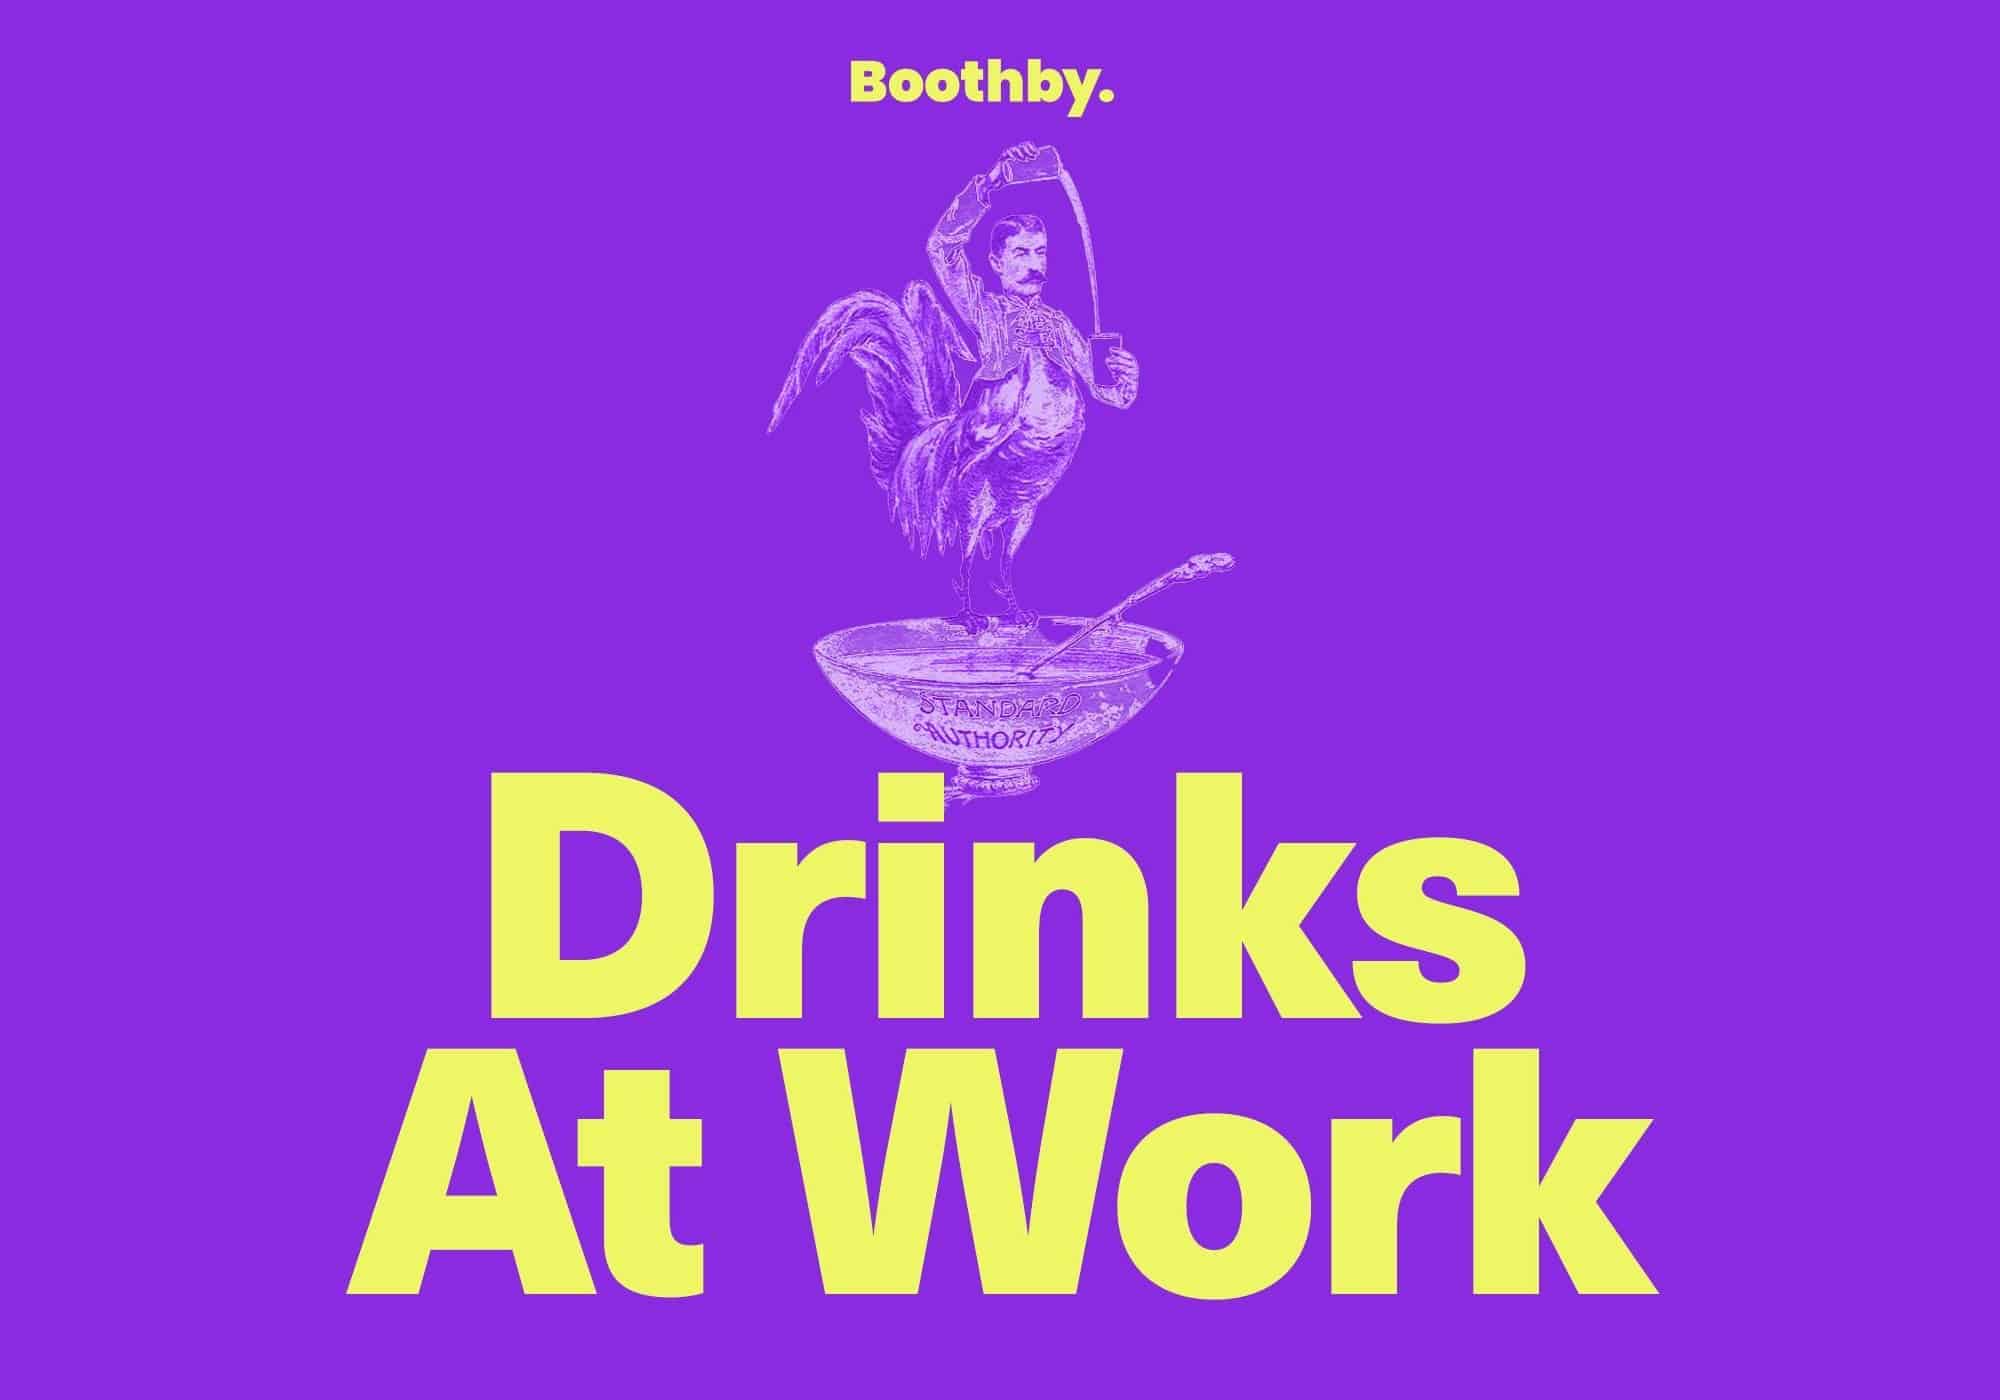 Boothby lance un nouveau podcast : Drinks At Work